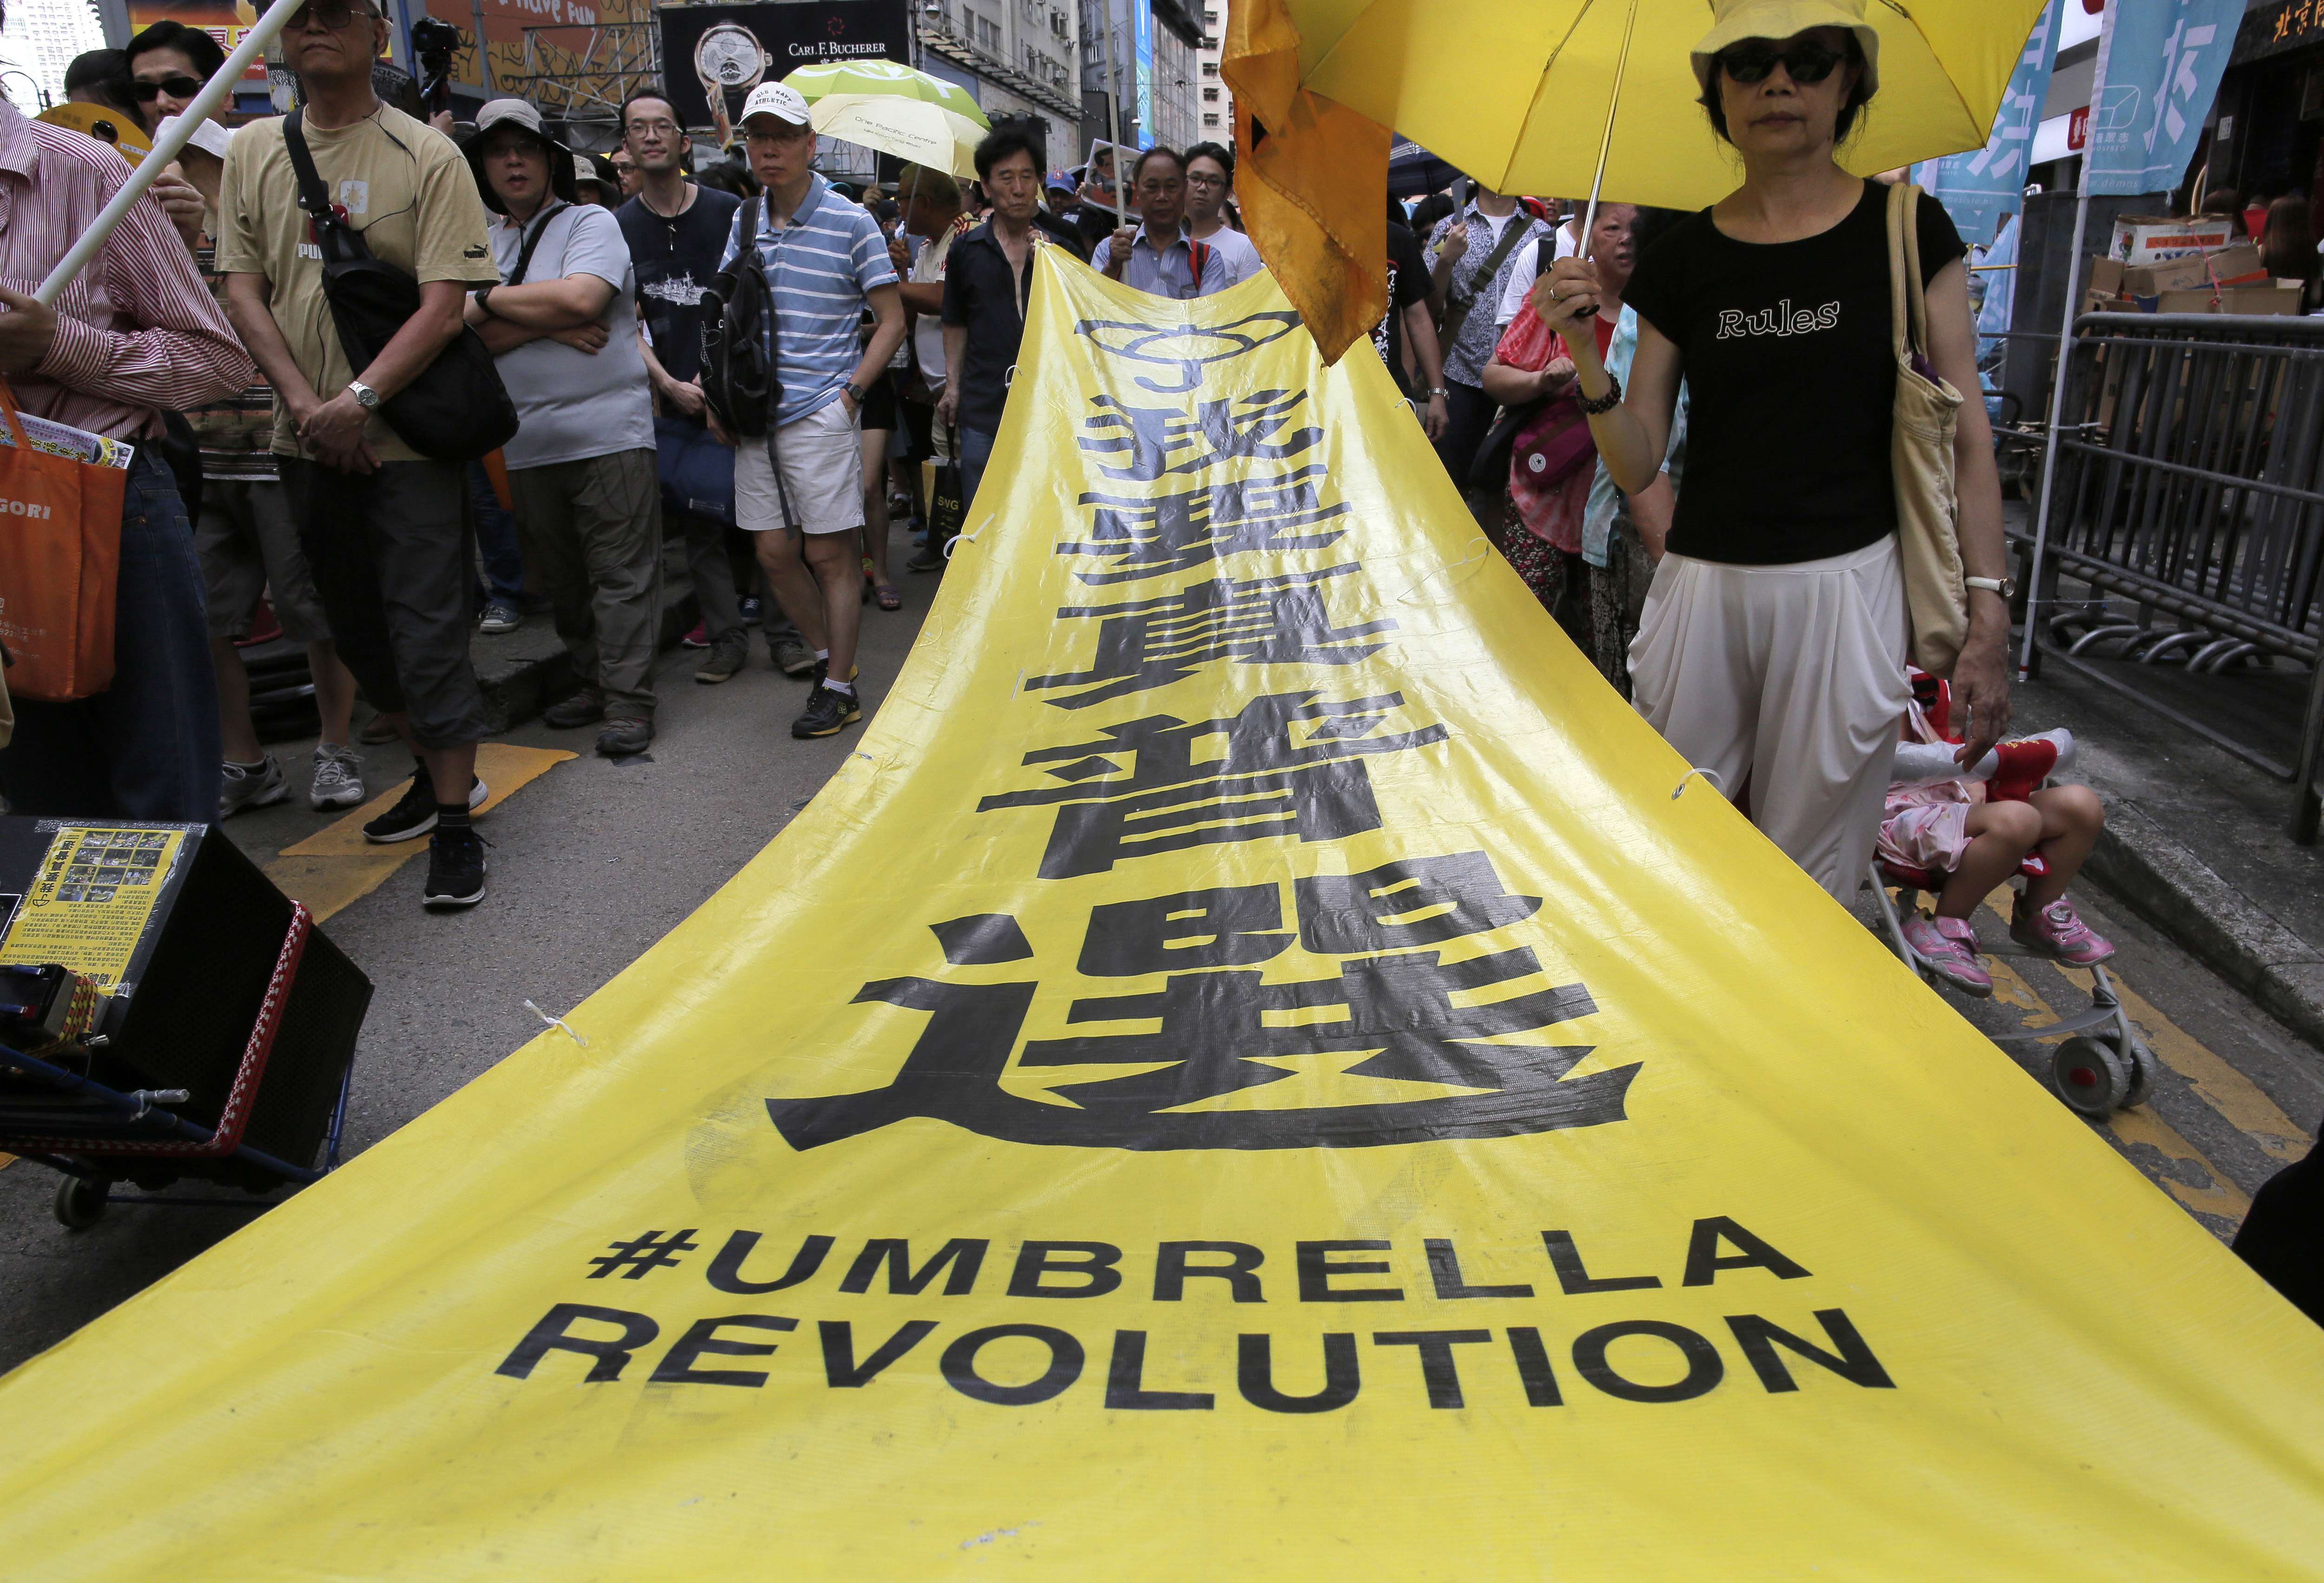 Demonstrators taking part in Hong Kong’s annual pro-democracy march carry a banner saying “I want genuine universal suffrage”, above the hashtag “Umbrella Revolution”, last July 1. Photo: AP